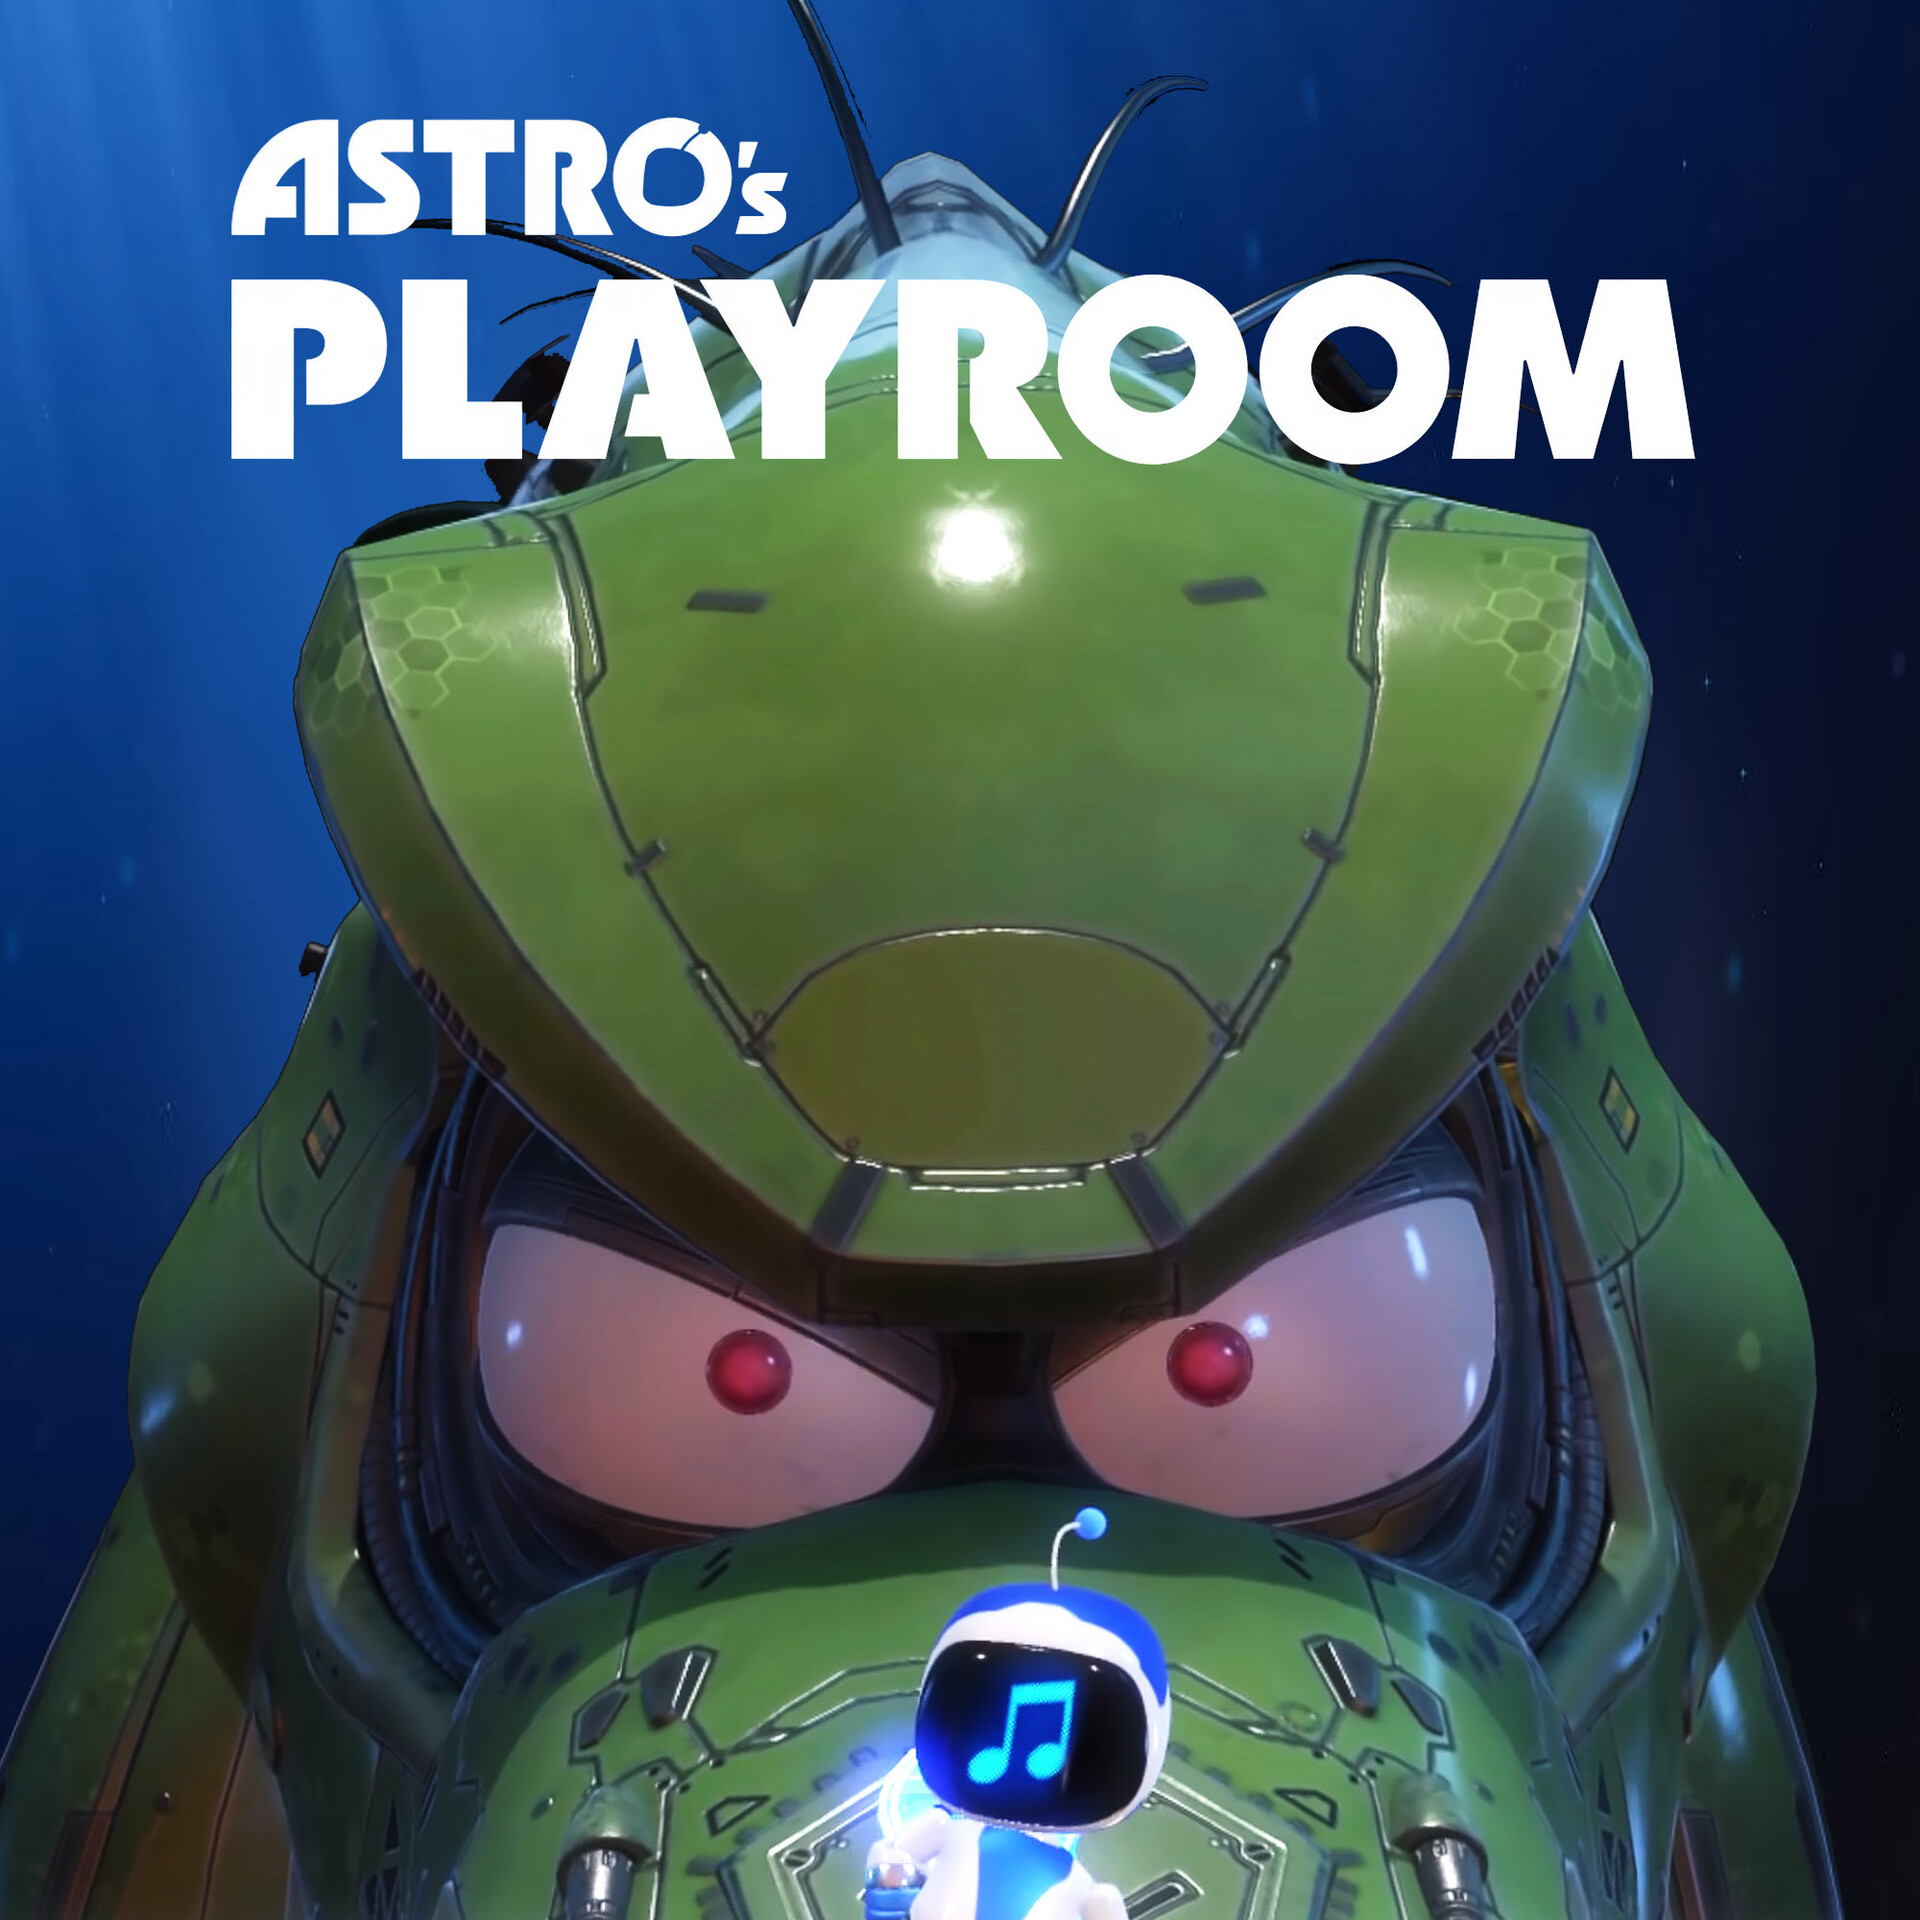 ASTRO'S PLAYROOM [PS5] #4 - FINAL DINOSSAURO 